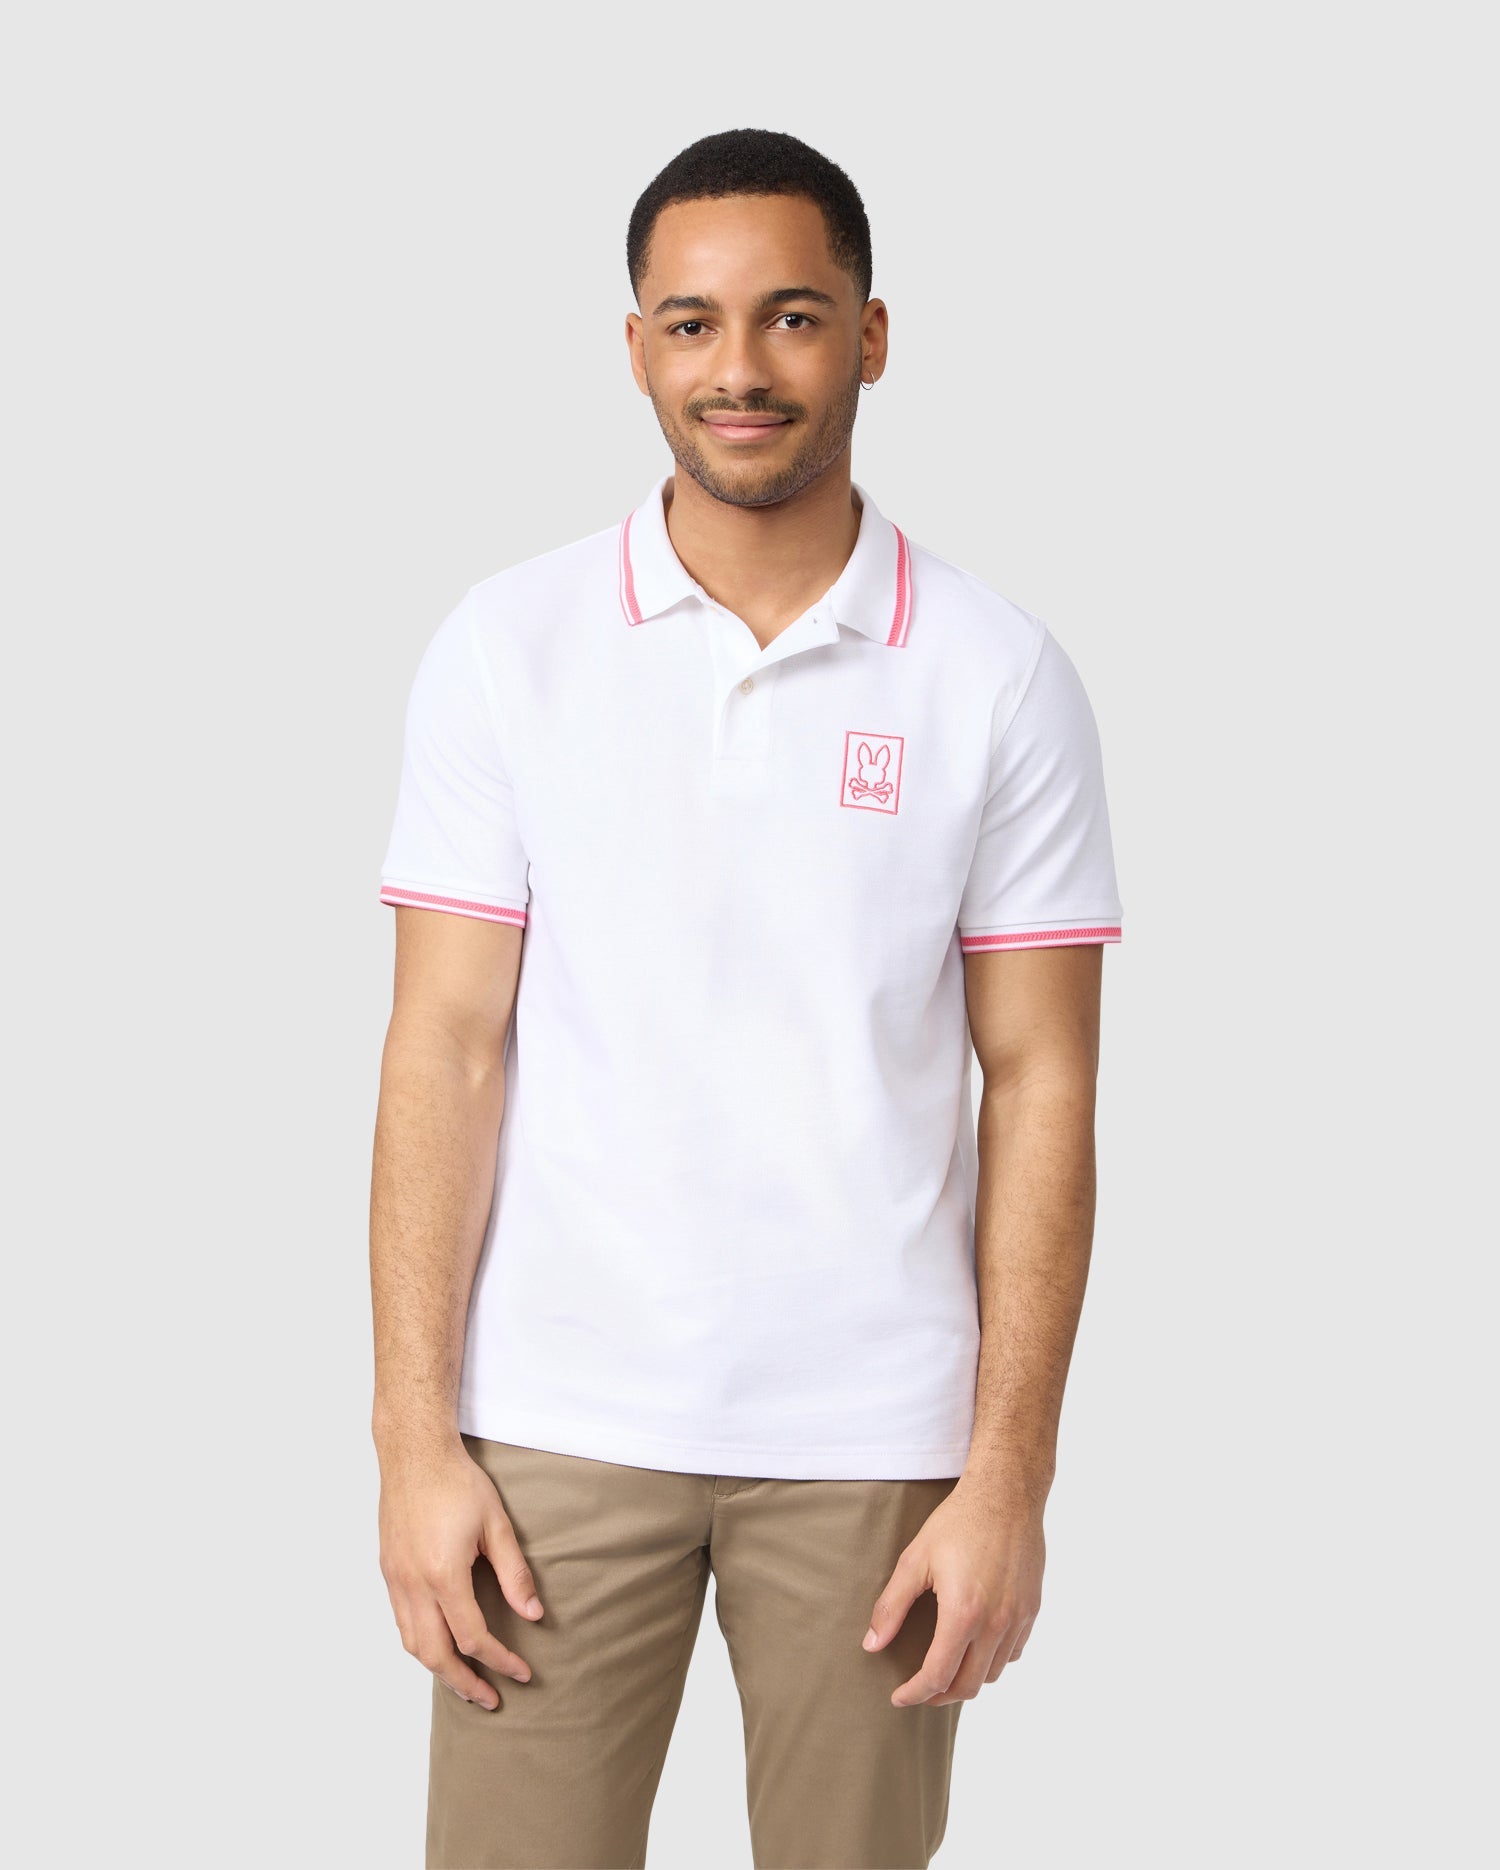 A man is standing against a plain white background, wearing a Psycho Bunny MENS ARCADIA PIQUE POLO SHIRT - B6K406B200 made from soft Peruvian Pima cotton. The shirt features red trim on the collar and sleeves and a small red bunny logo on the left side of the chest. He has short hair and a trimmed beard, and he is looking at the camera while smiling.